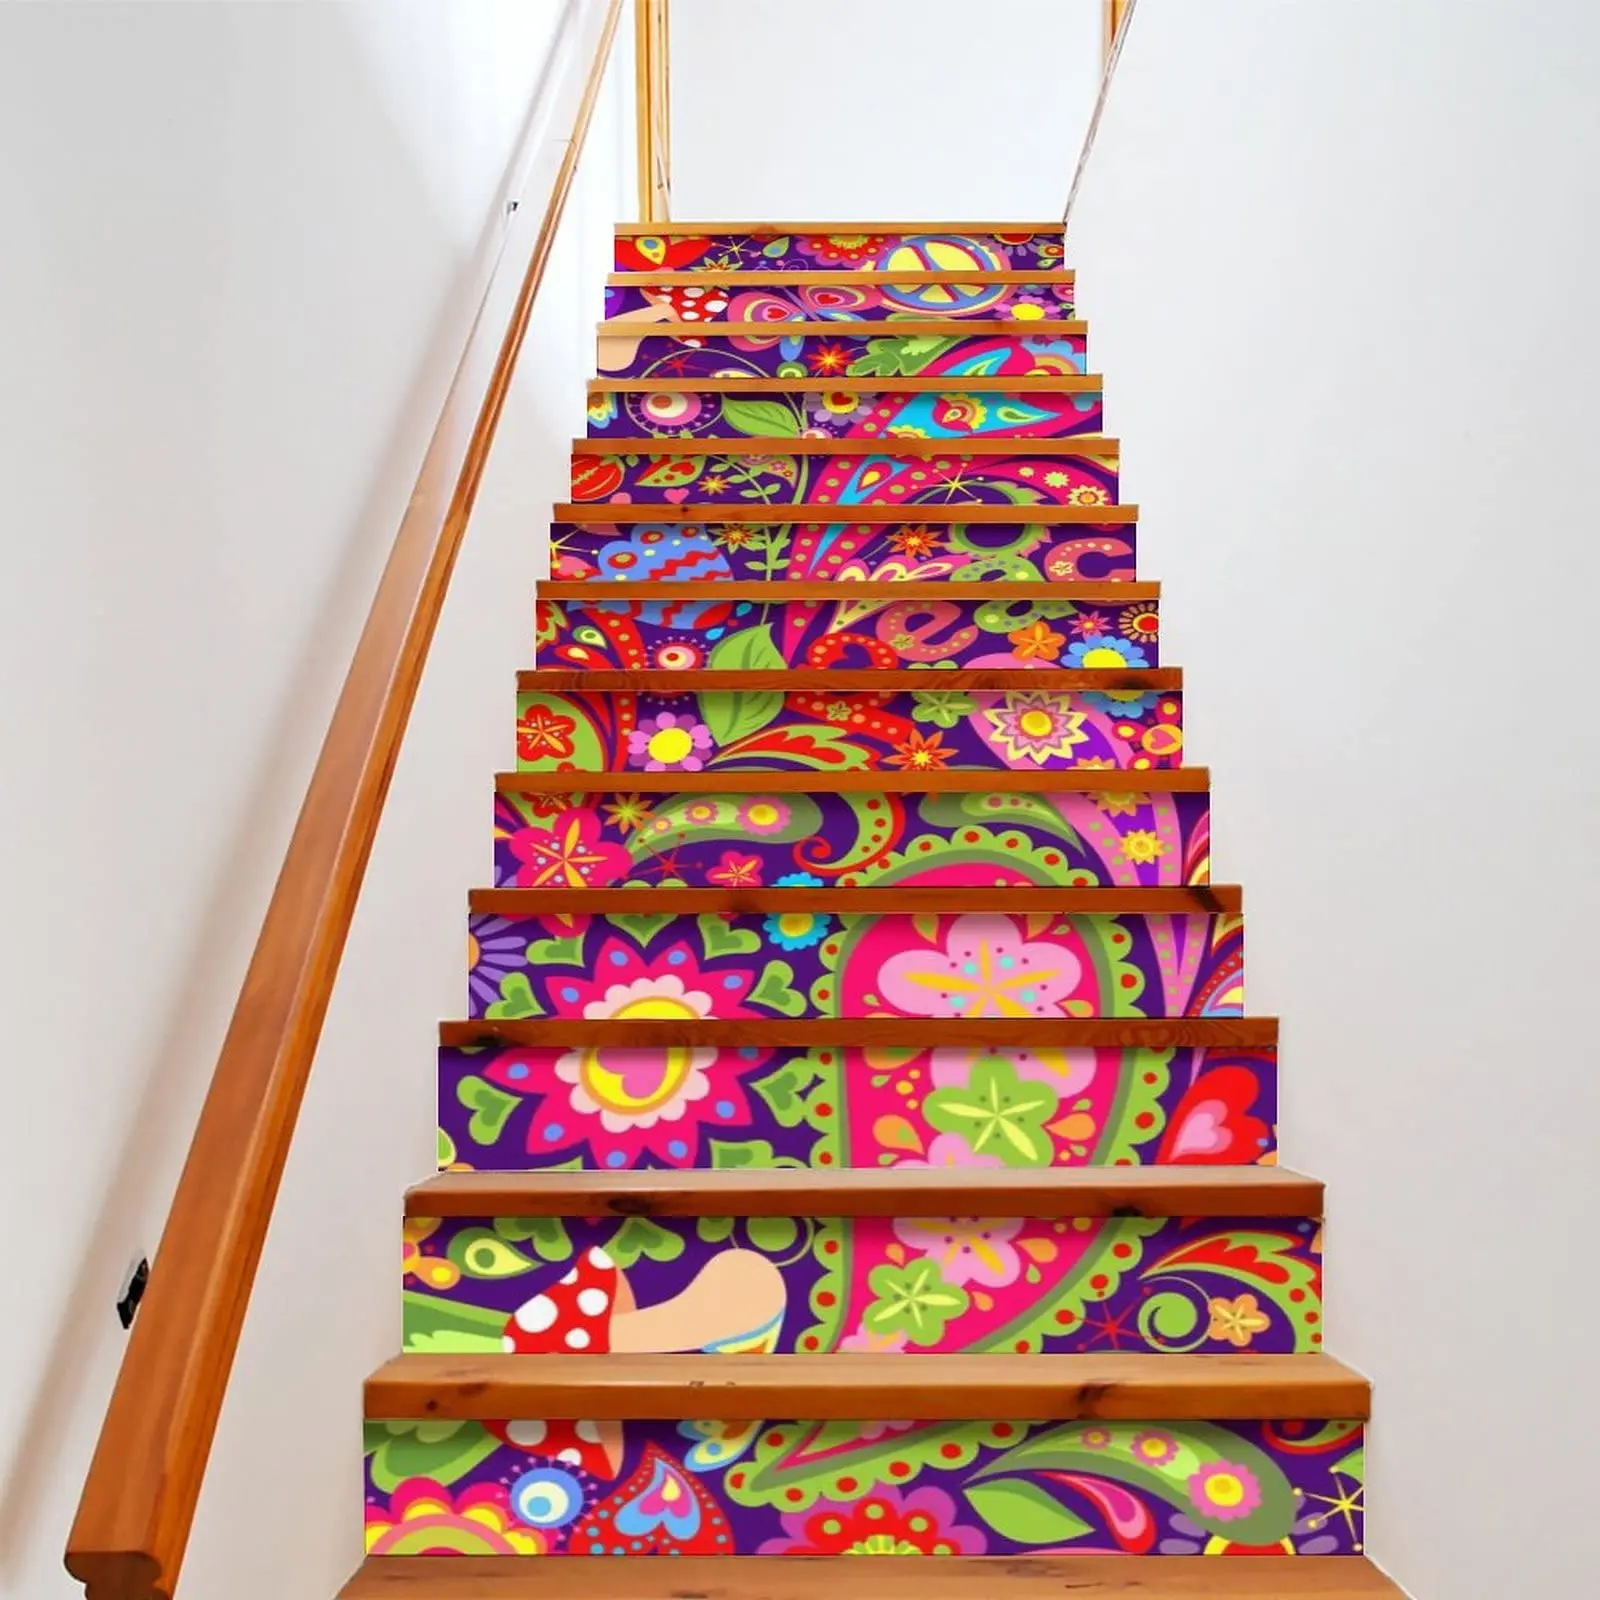 

Cashew Flowers Stair Stickers Abstract Art Stairs Riser Decals Self-adhesive Colorful Floral Staircase Murals Indoor Steps Decor